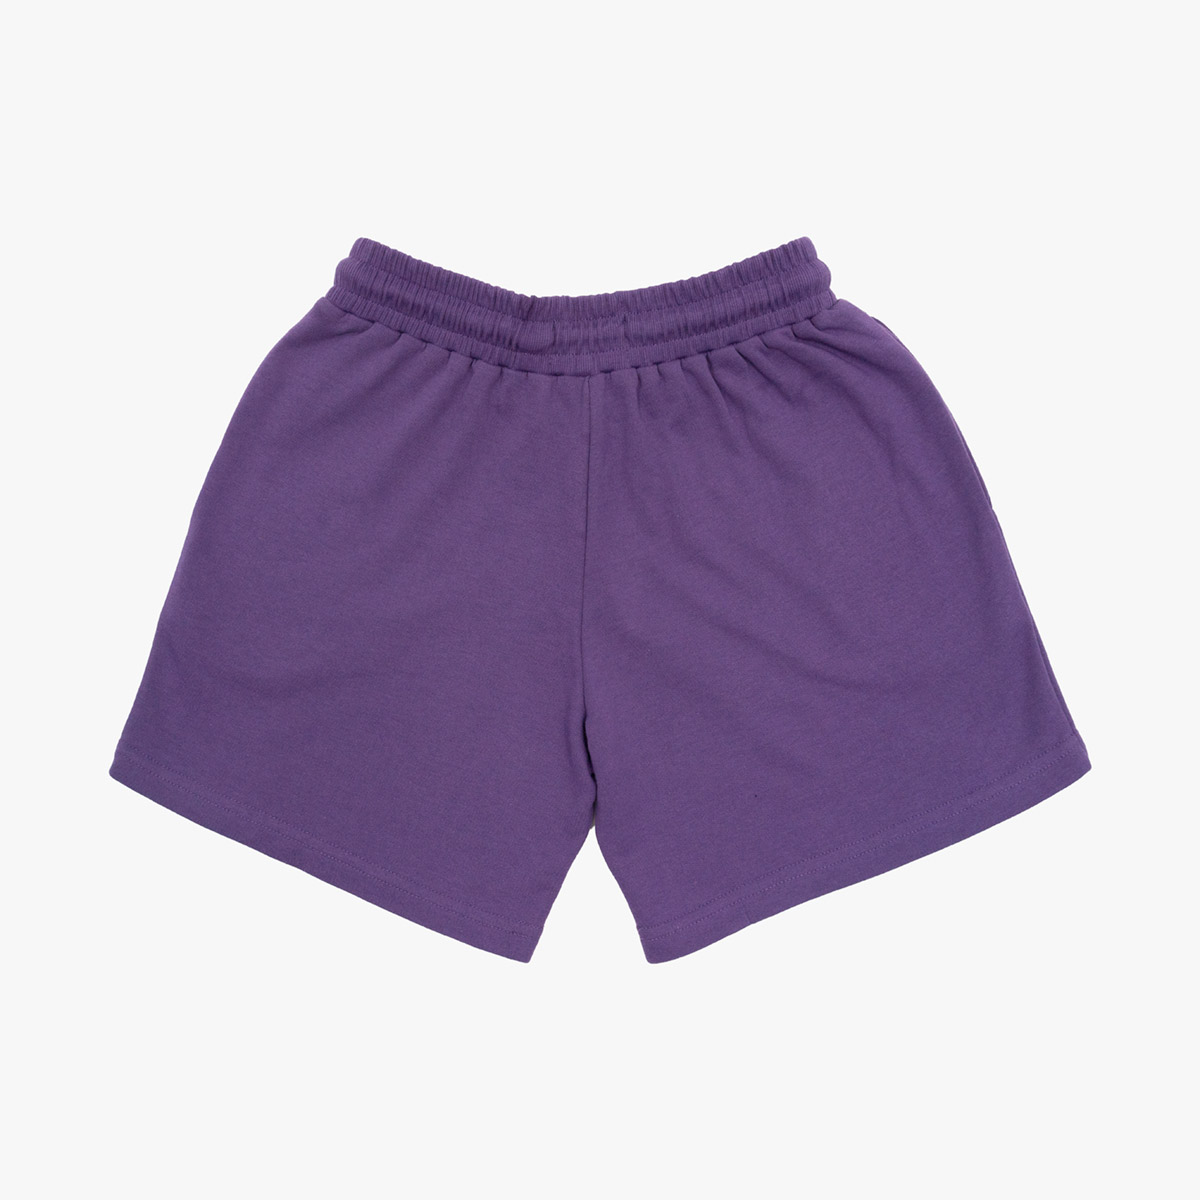 Ladies Fit Pop of Color French Terry Shorts in Grape Compote image number 4